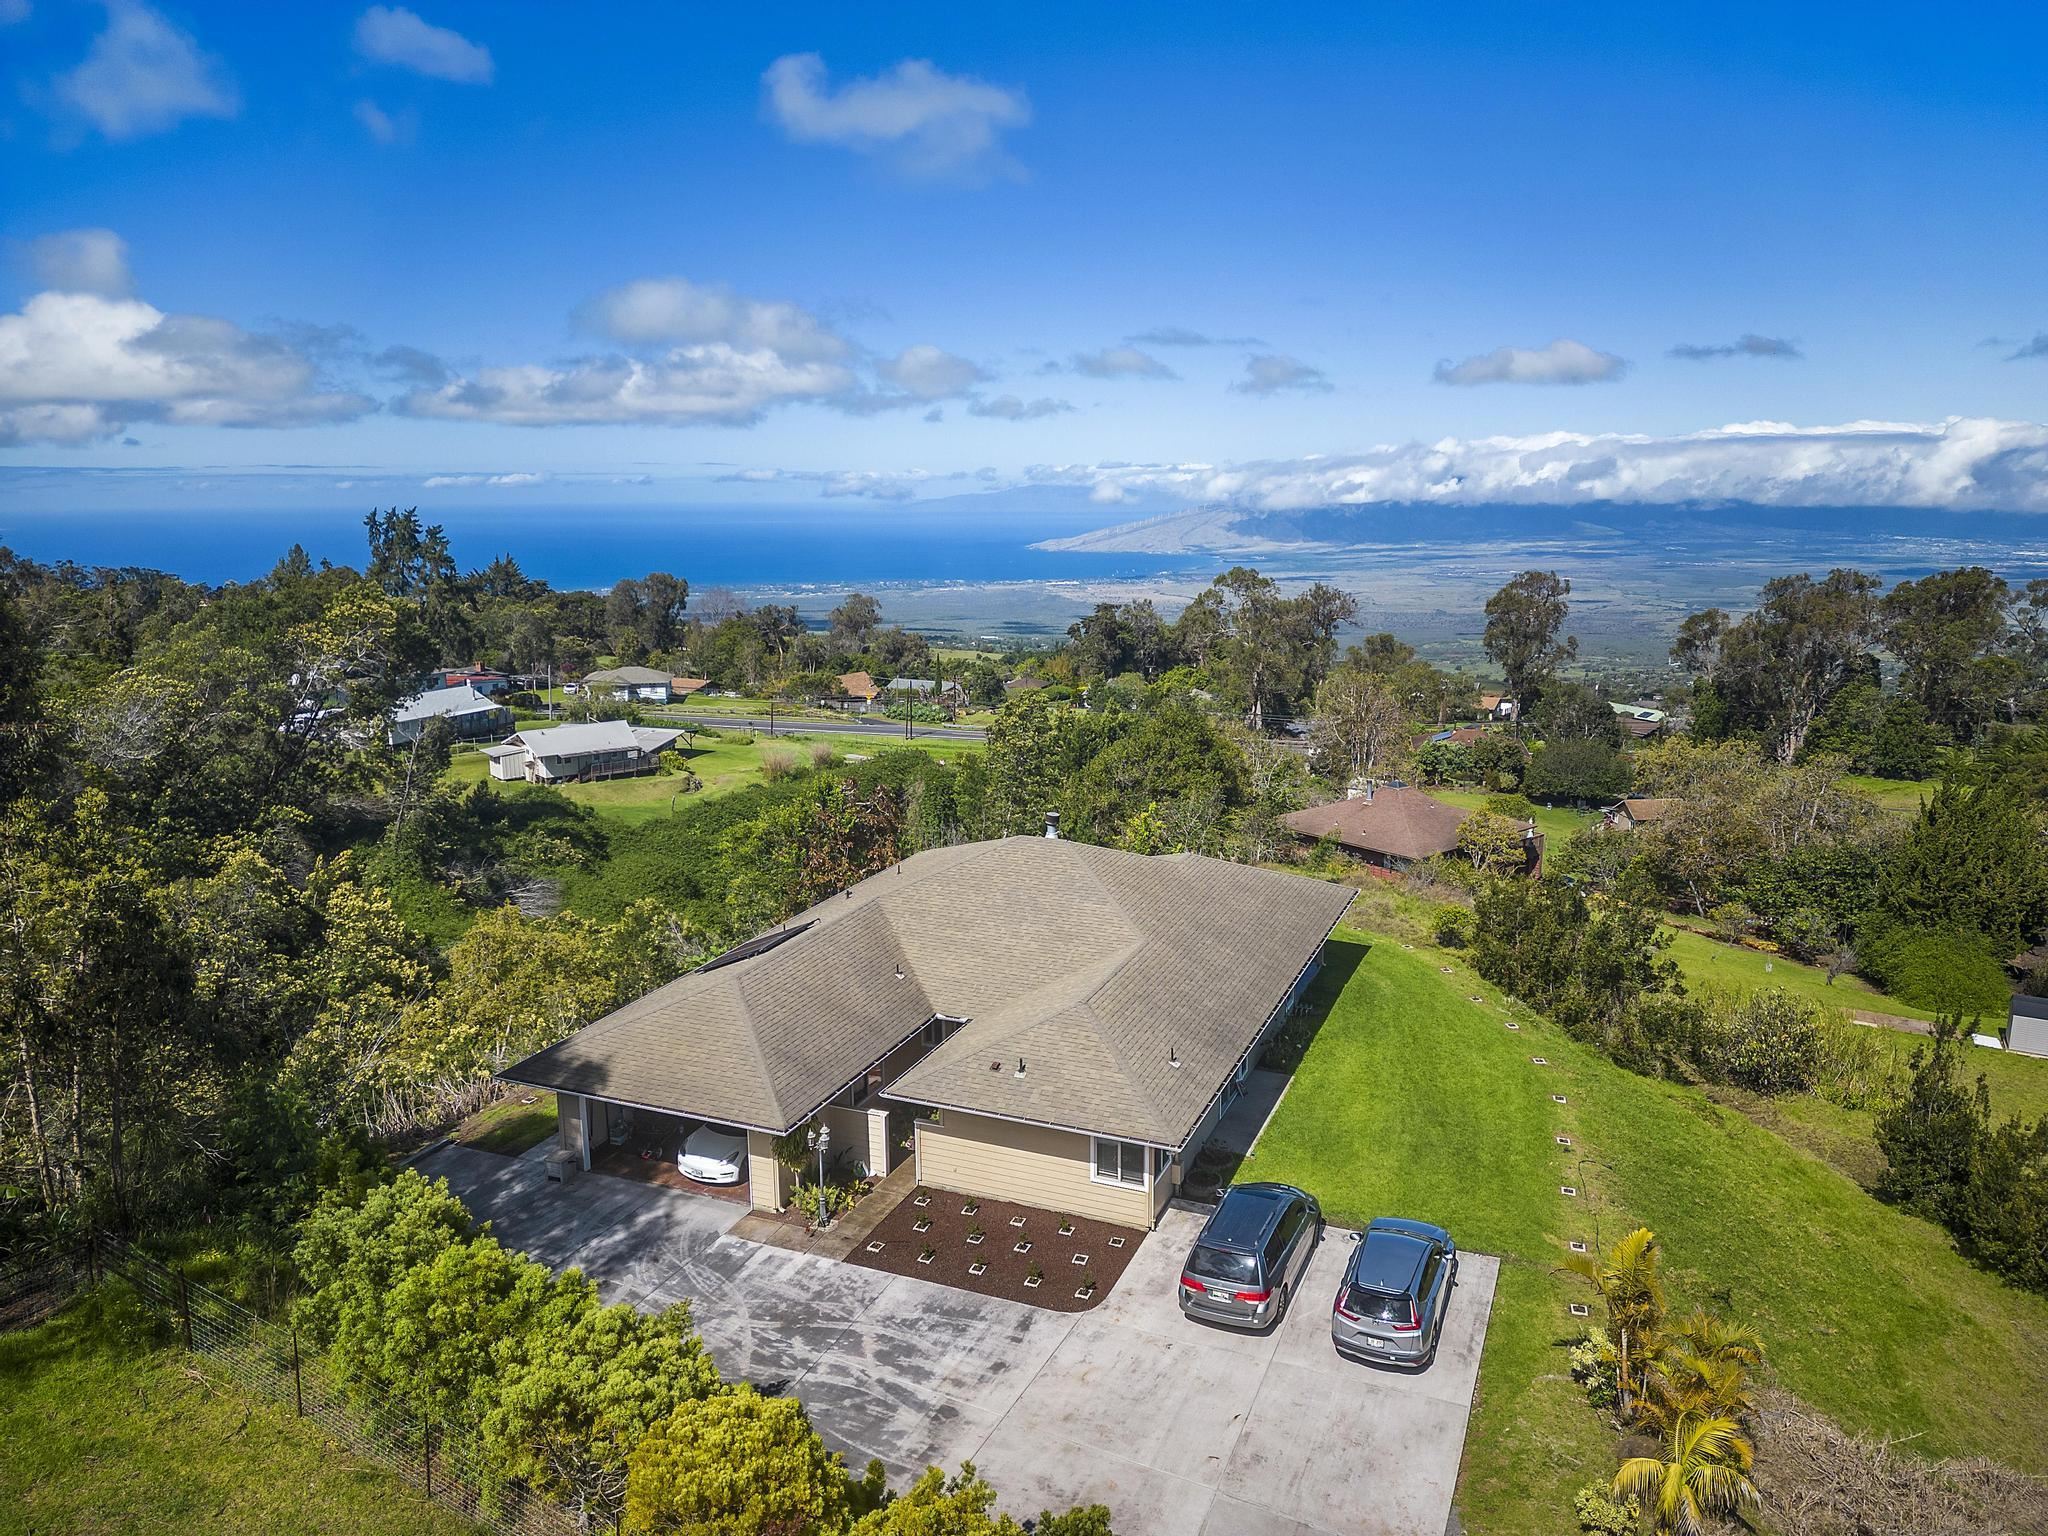 an aerial view of a house with yard and ocean view